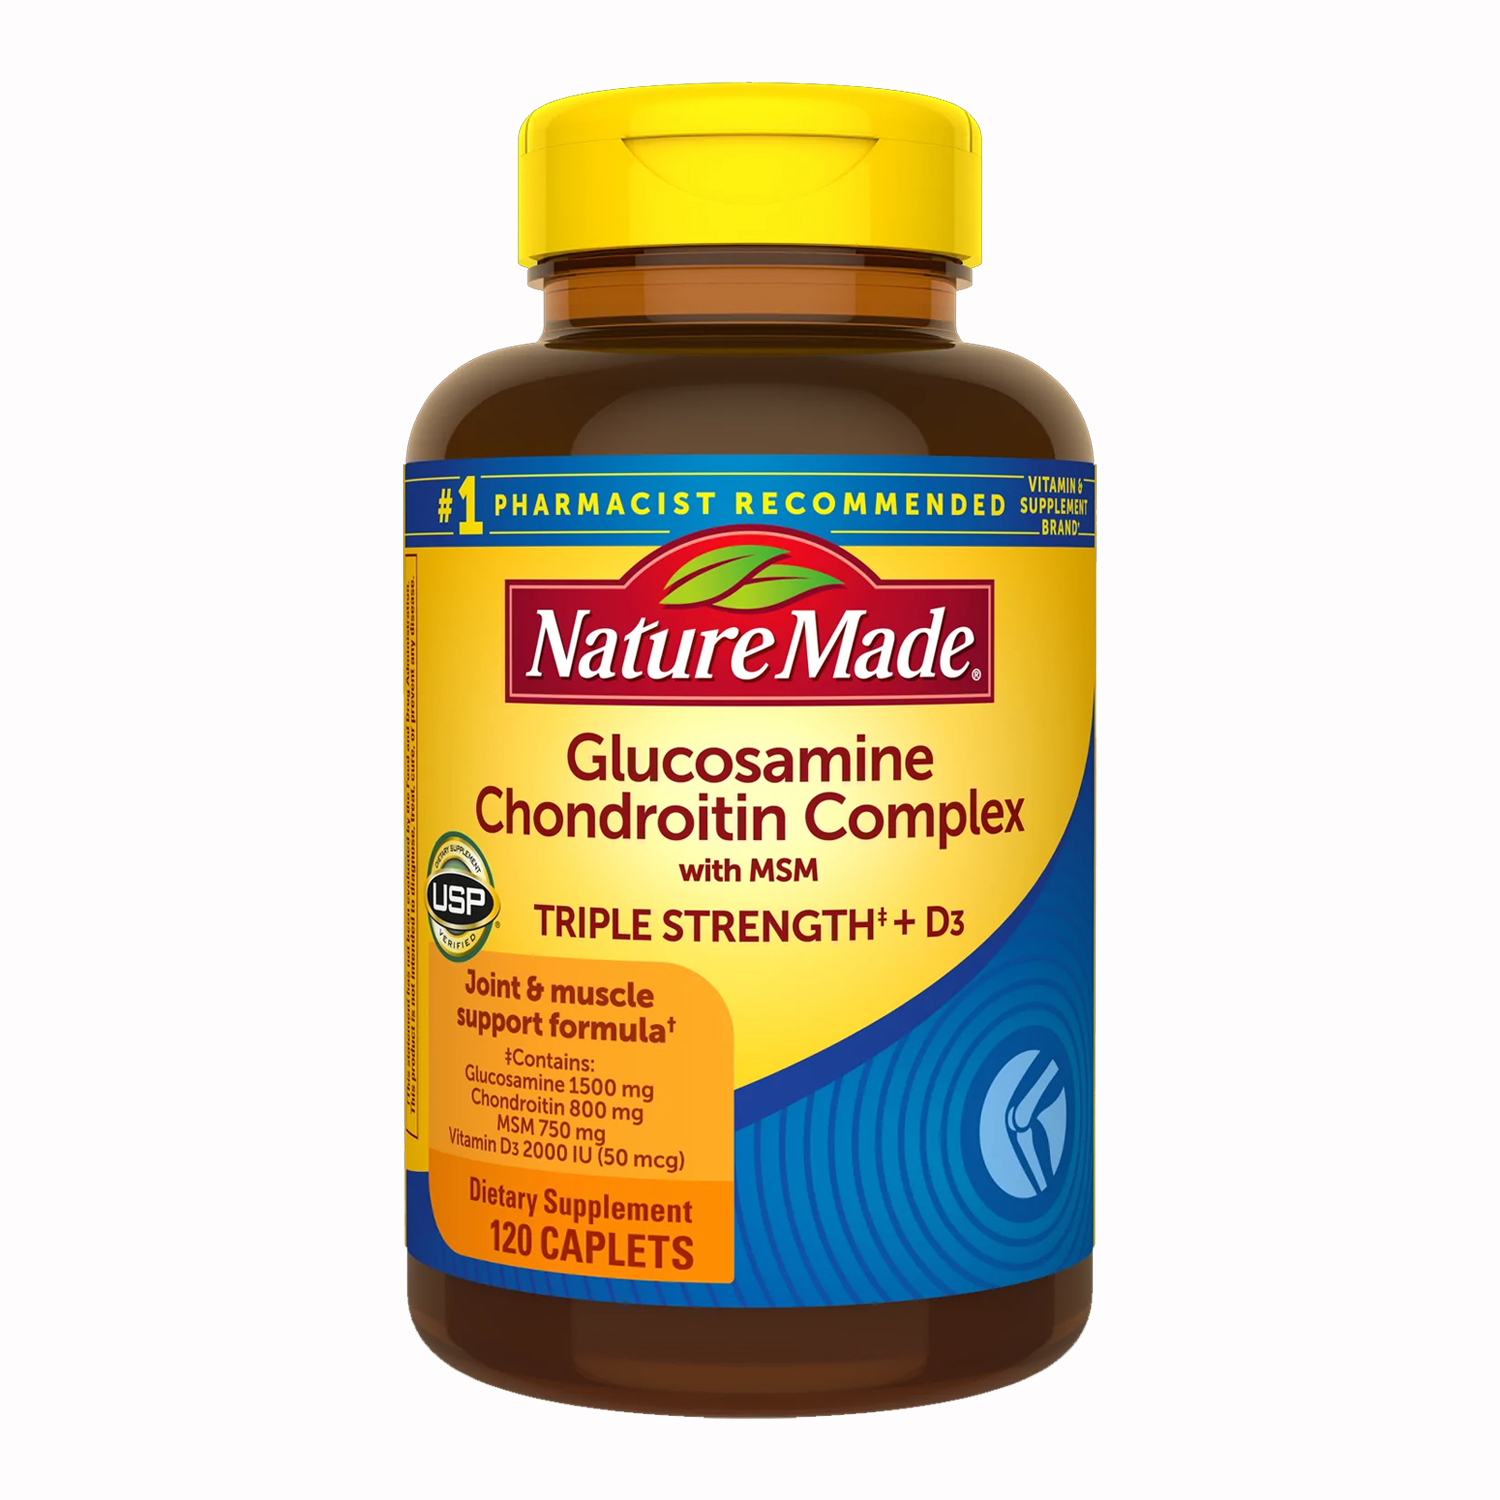 Nature Made Glucosamine Chondroitin Complex With MSM Triple Strength + Vitamin D3 / 120 Caplets